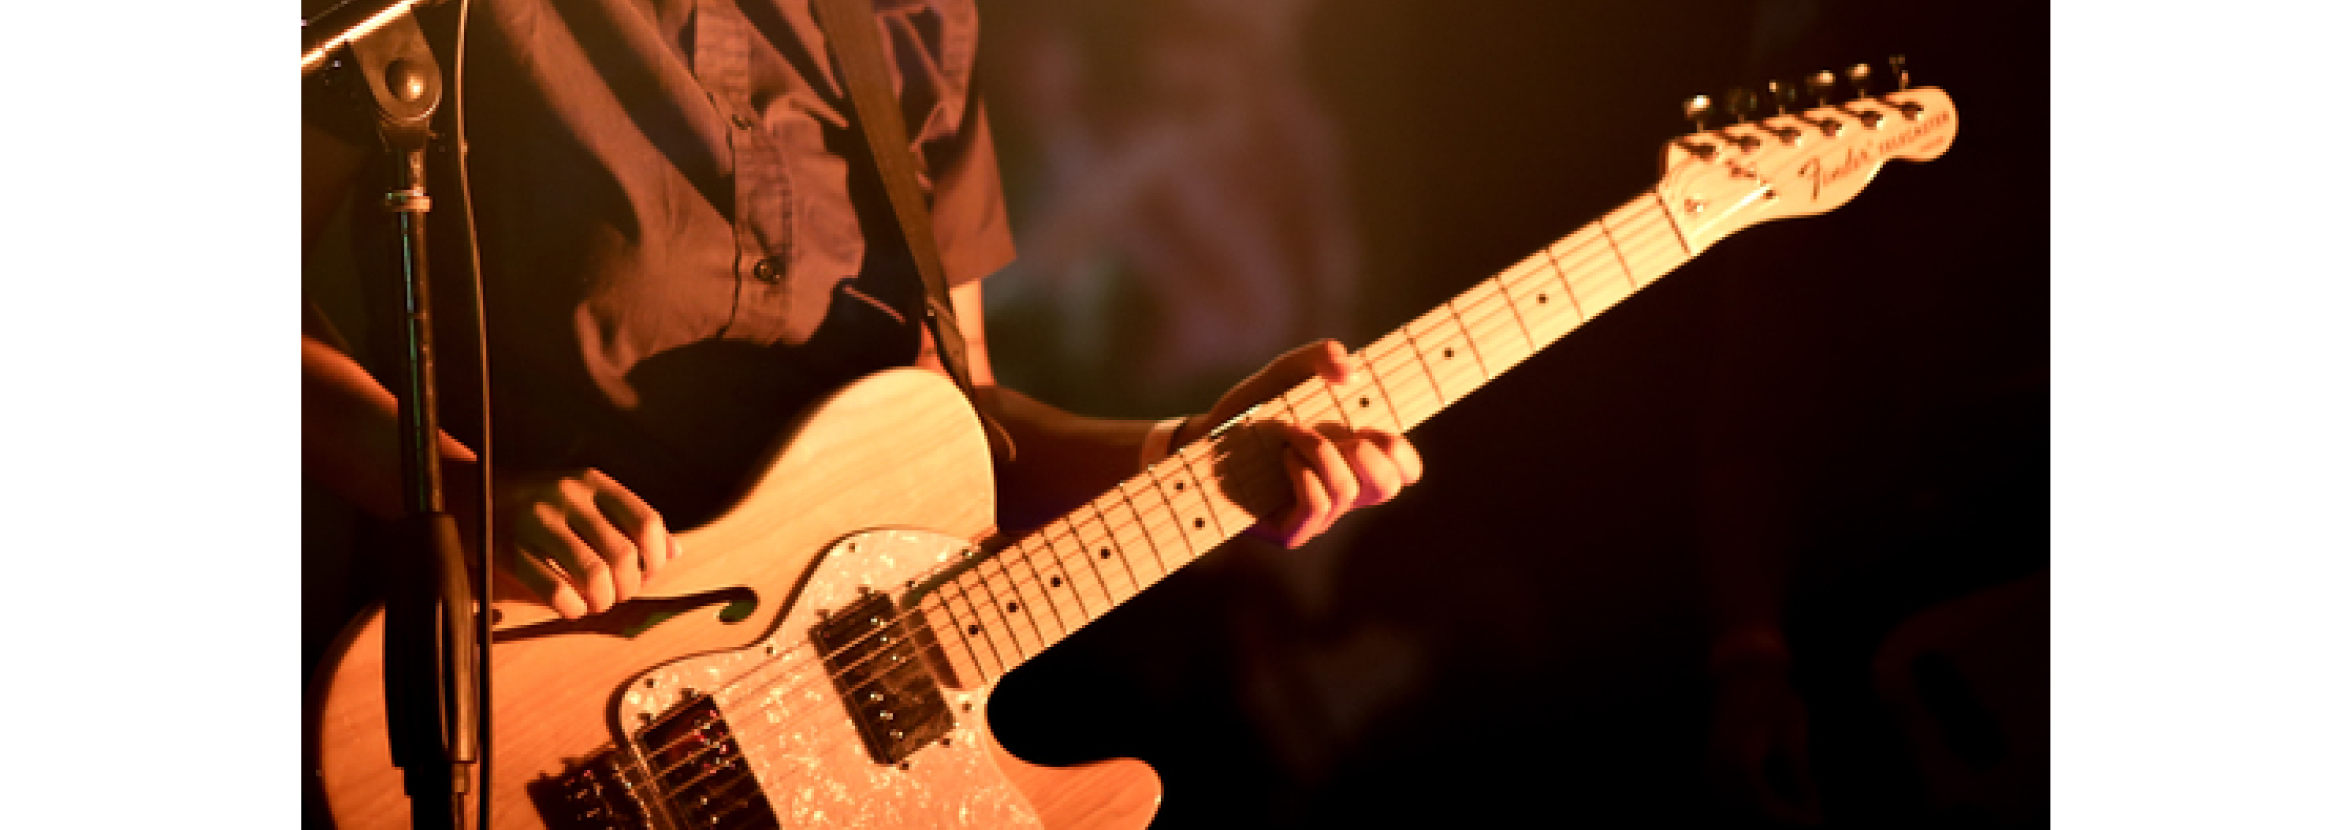 Close up of Paco’s hands playing electric guitar on stage.